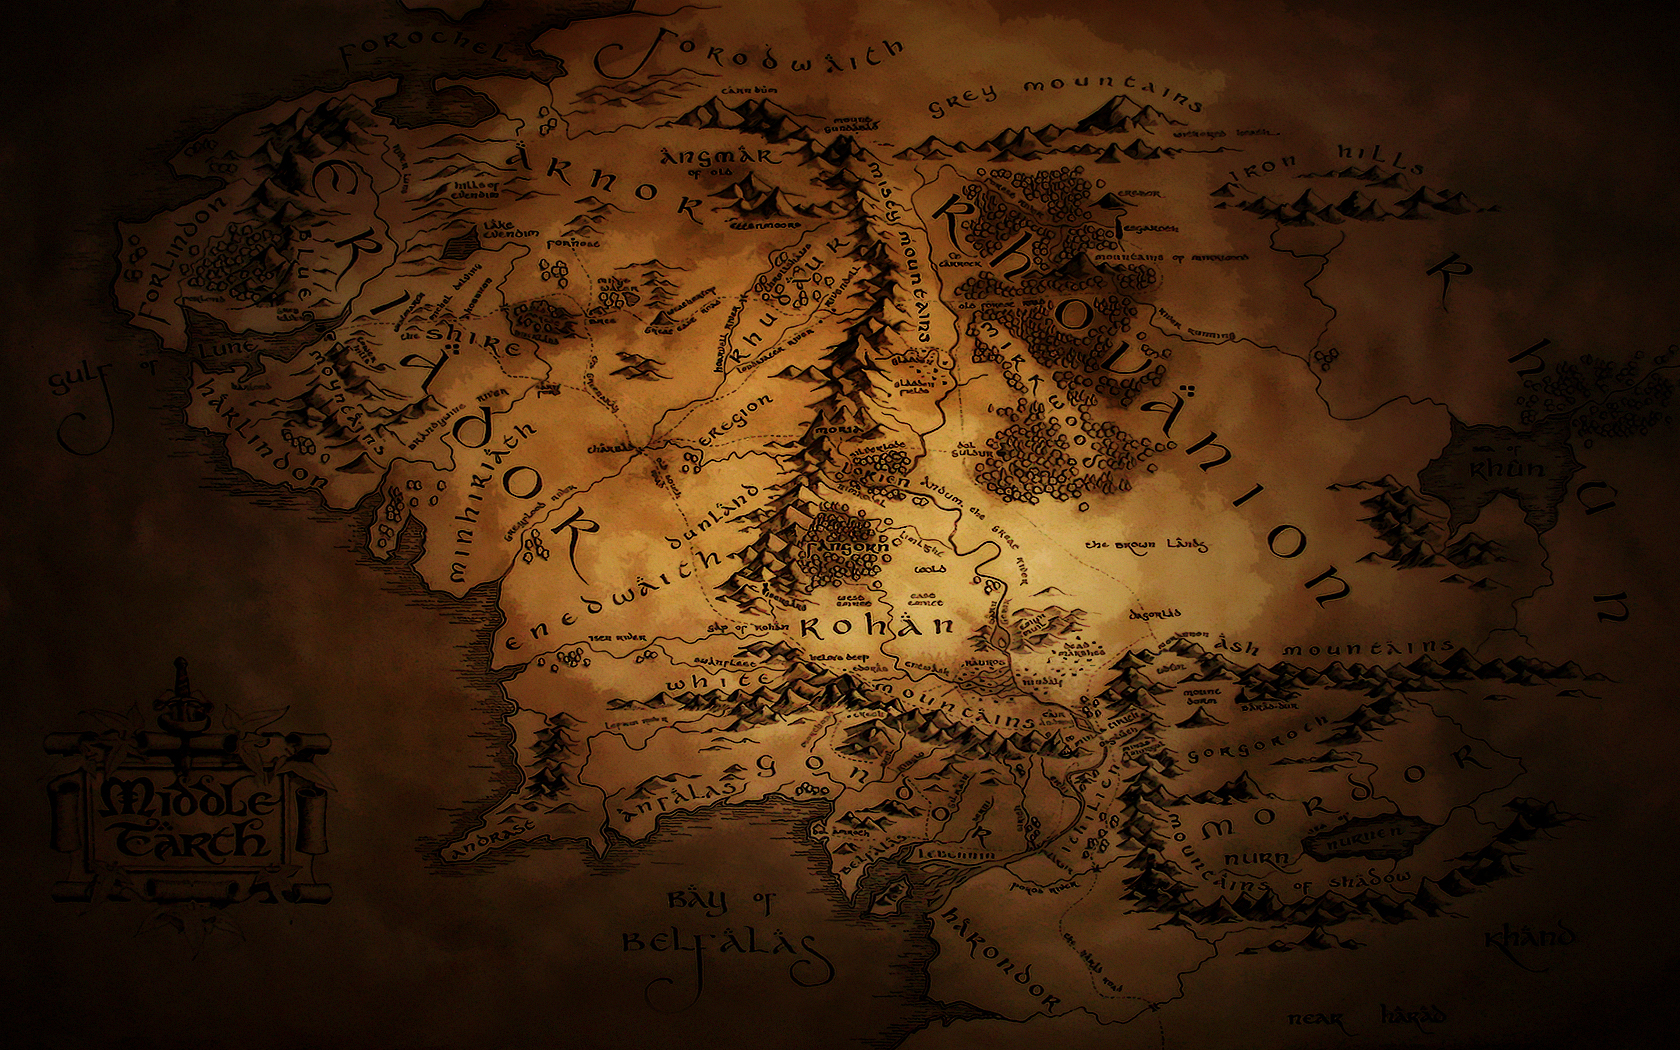 Middle Earth Map Wallpaper 2 by JohnnySlowhand on DeviantArt